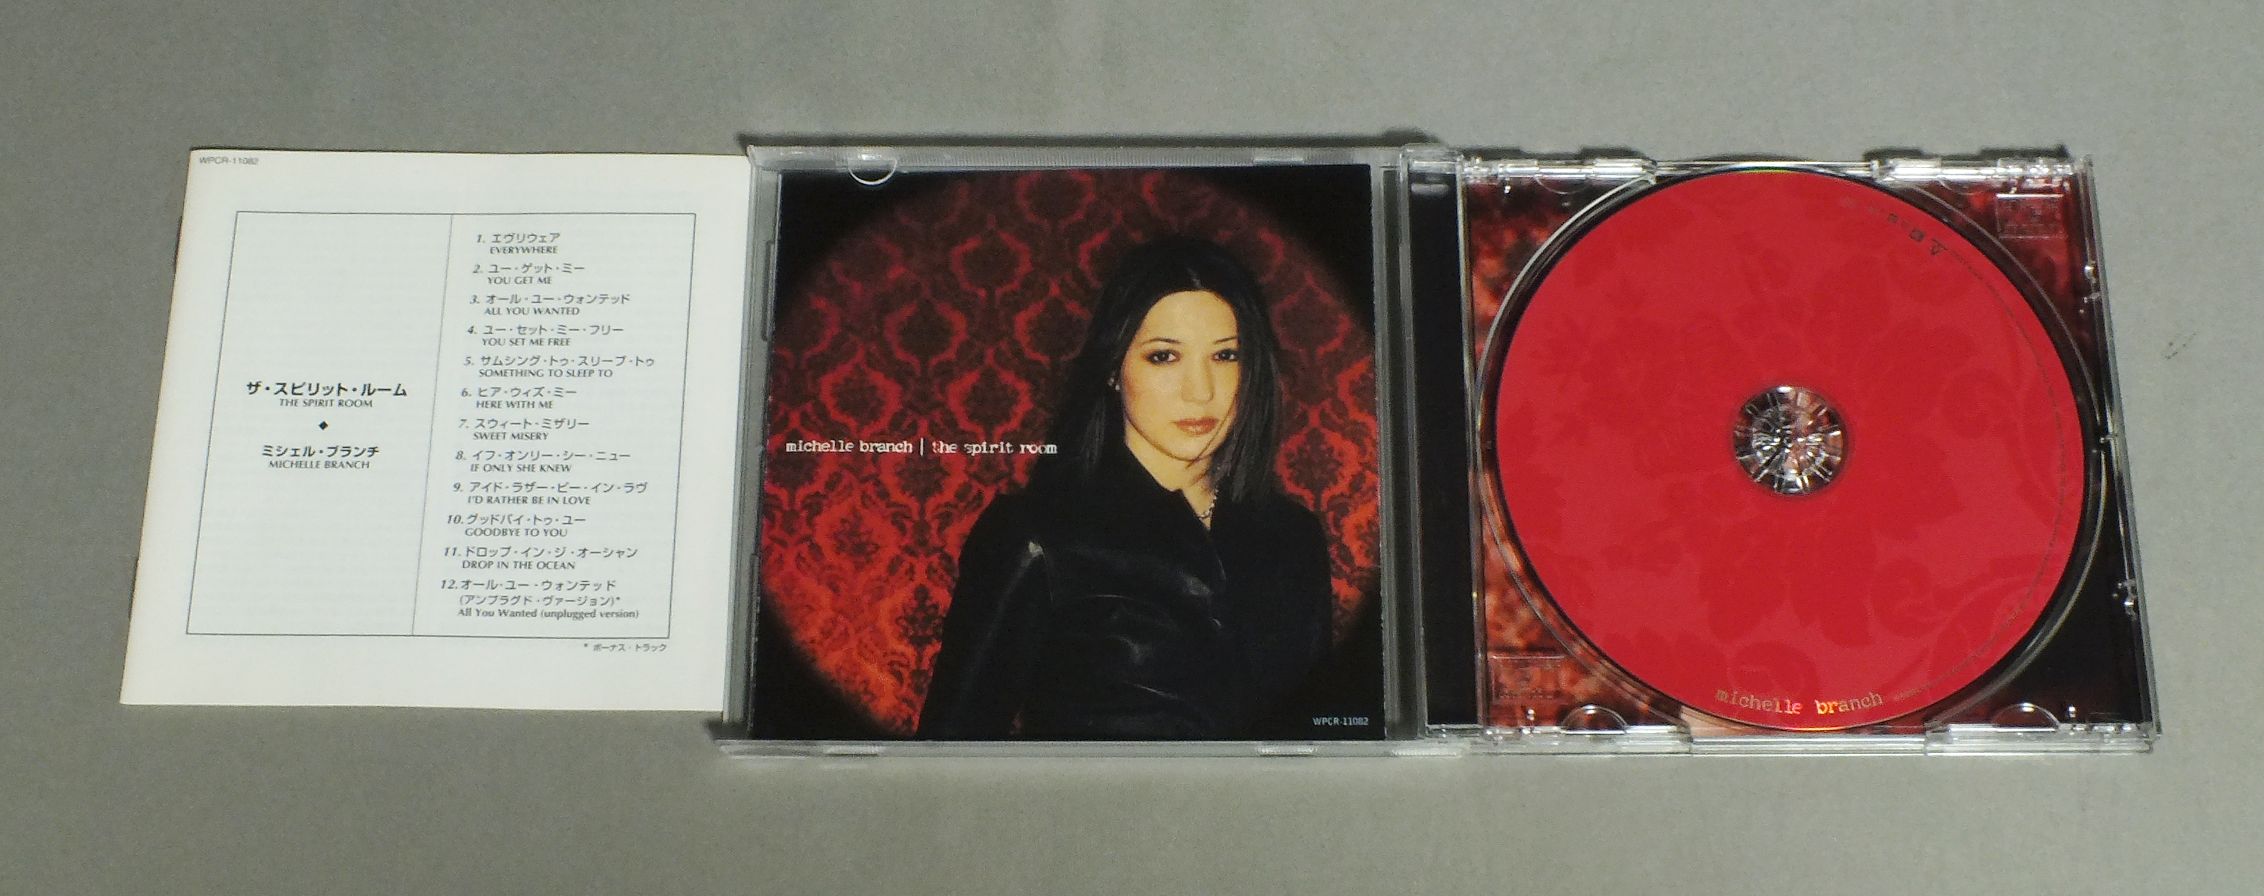 Spirit Room By Michelle Branch Cd With Fineday Music Records